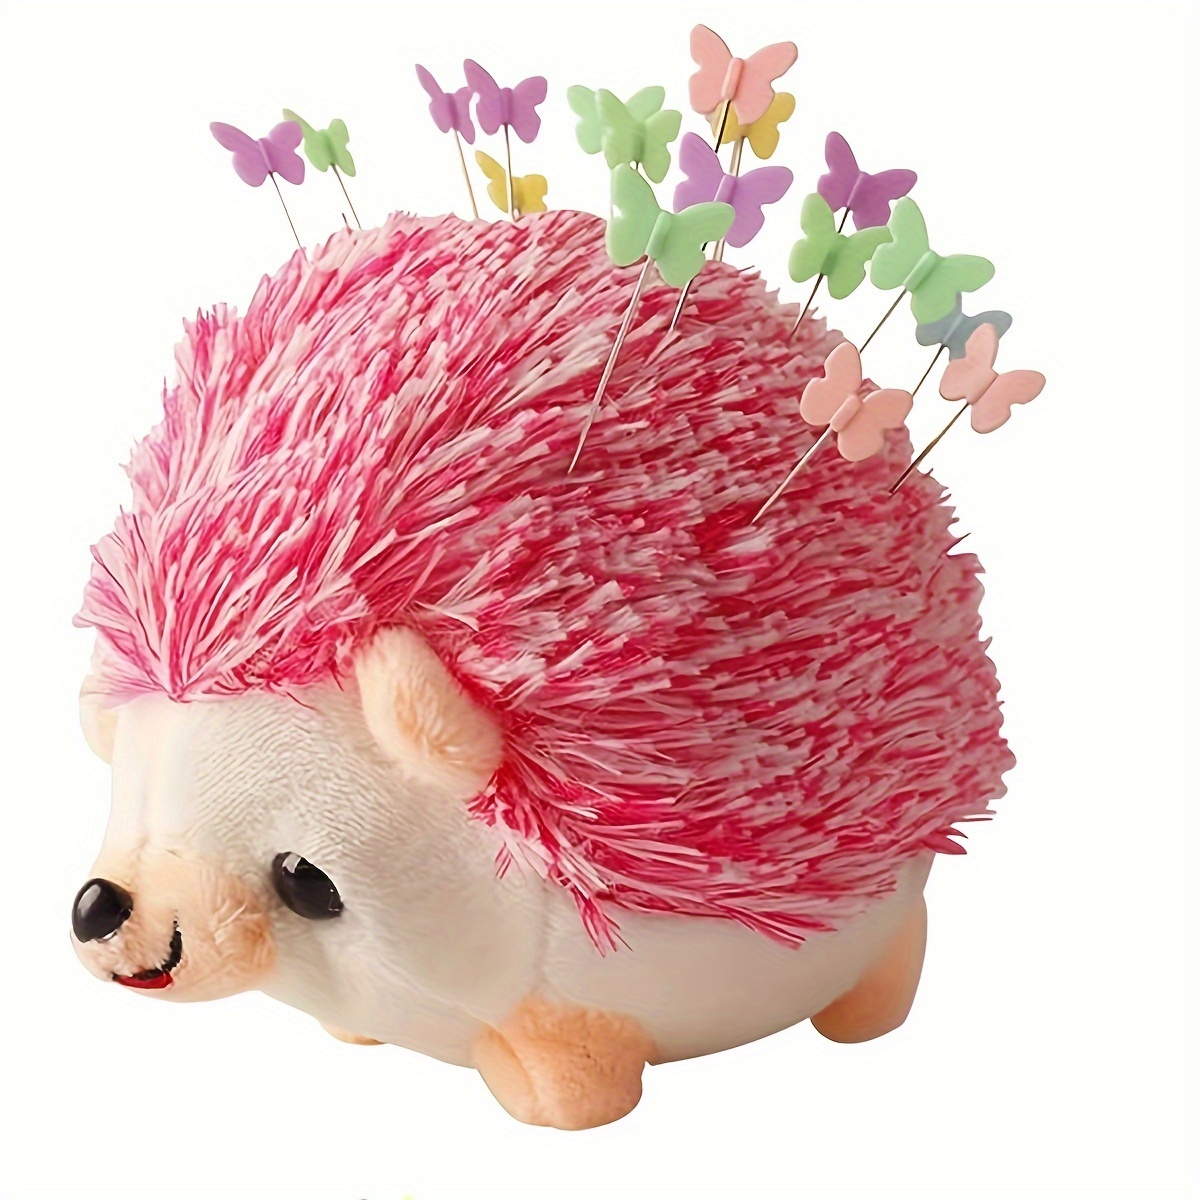 Wholesale Pink Hedgehog DIY Stuffed Animal Sewing Kit for your store - Faire